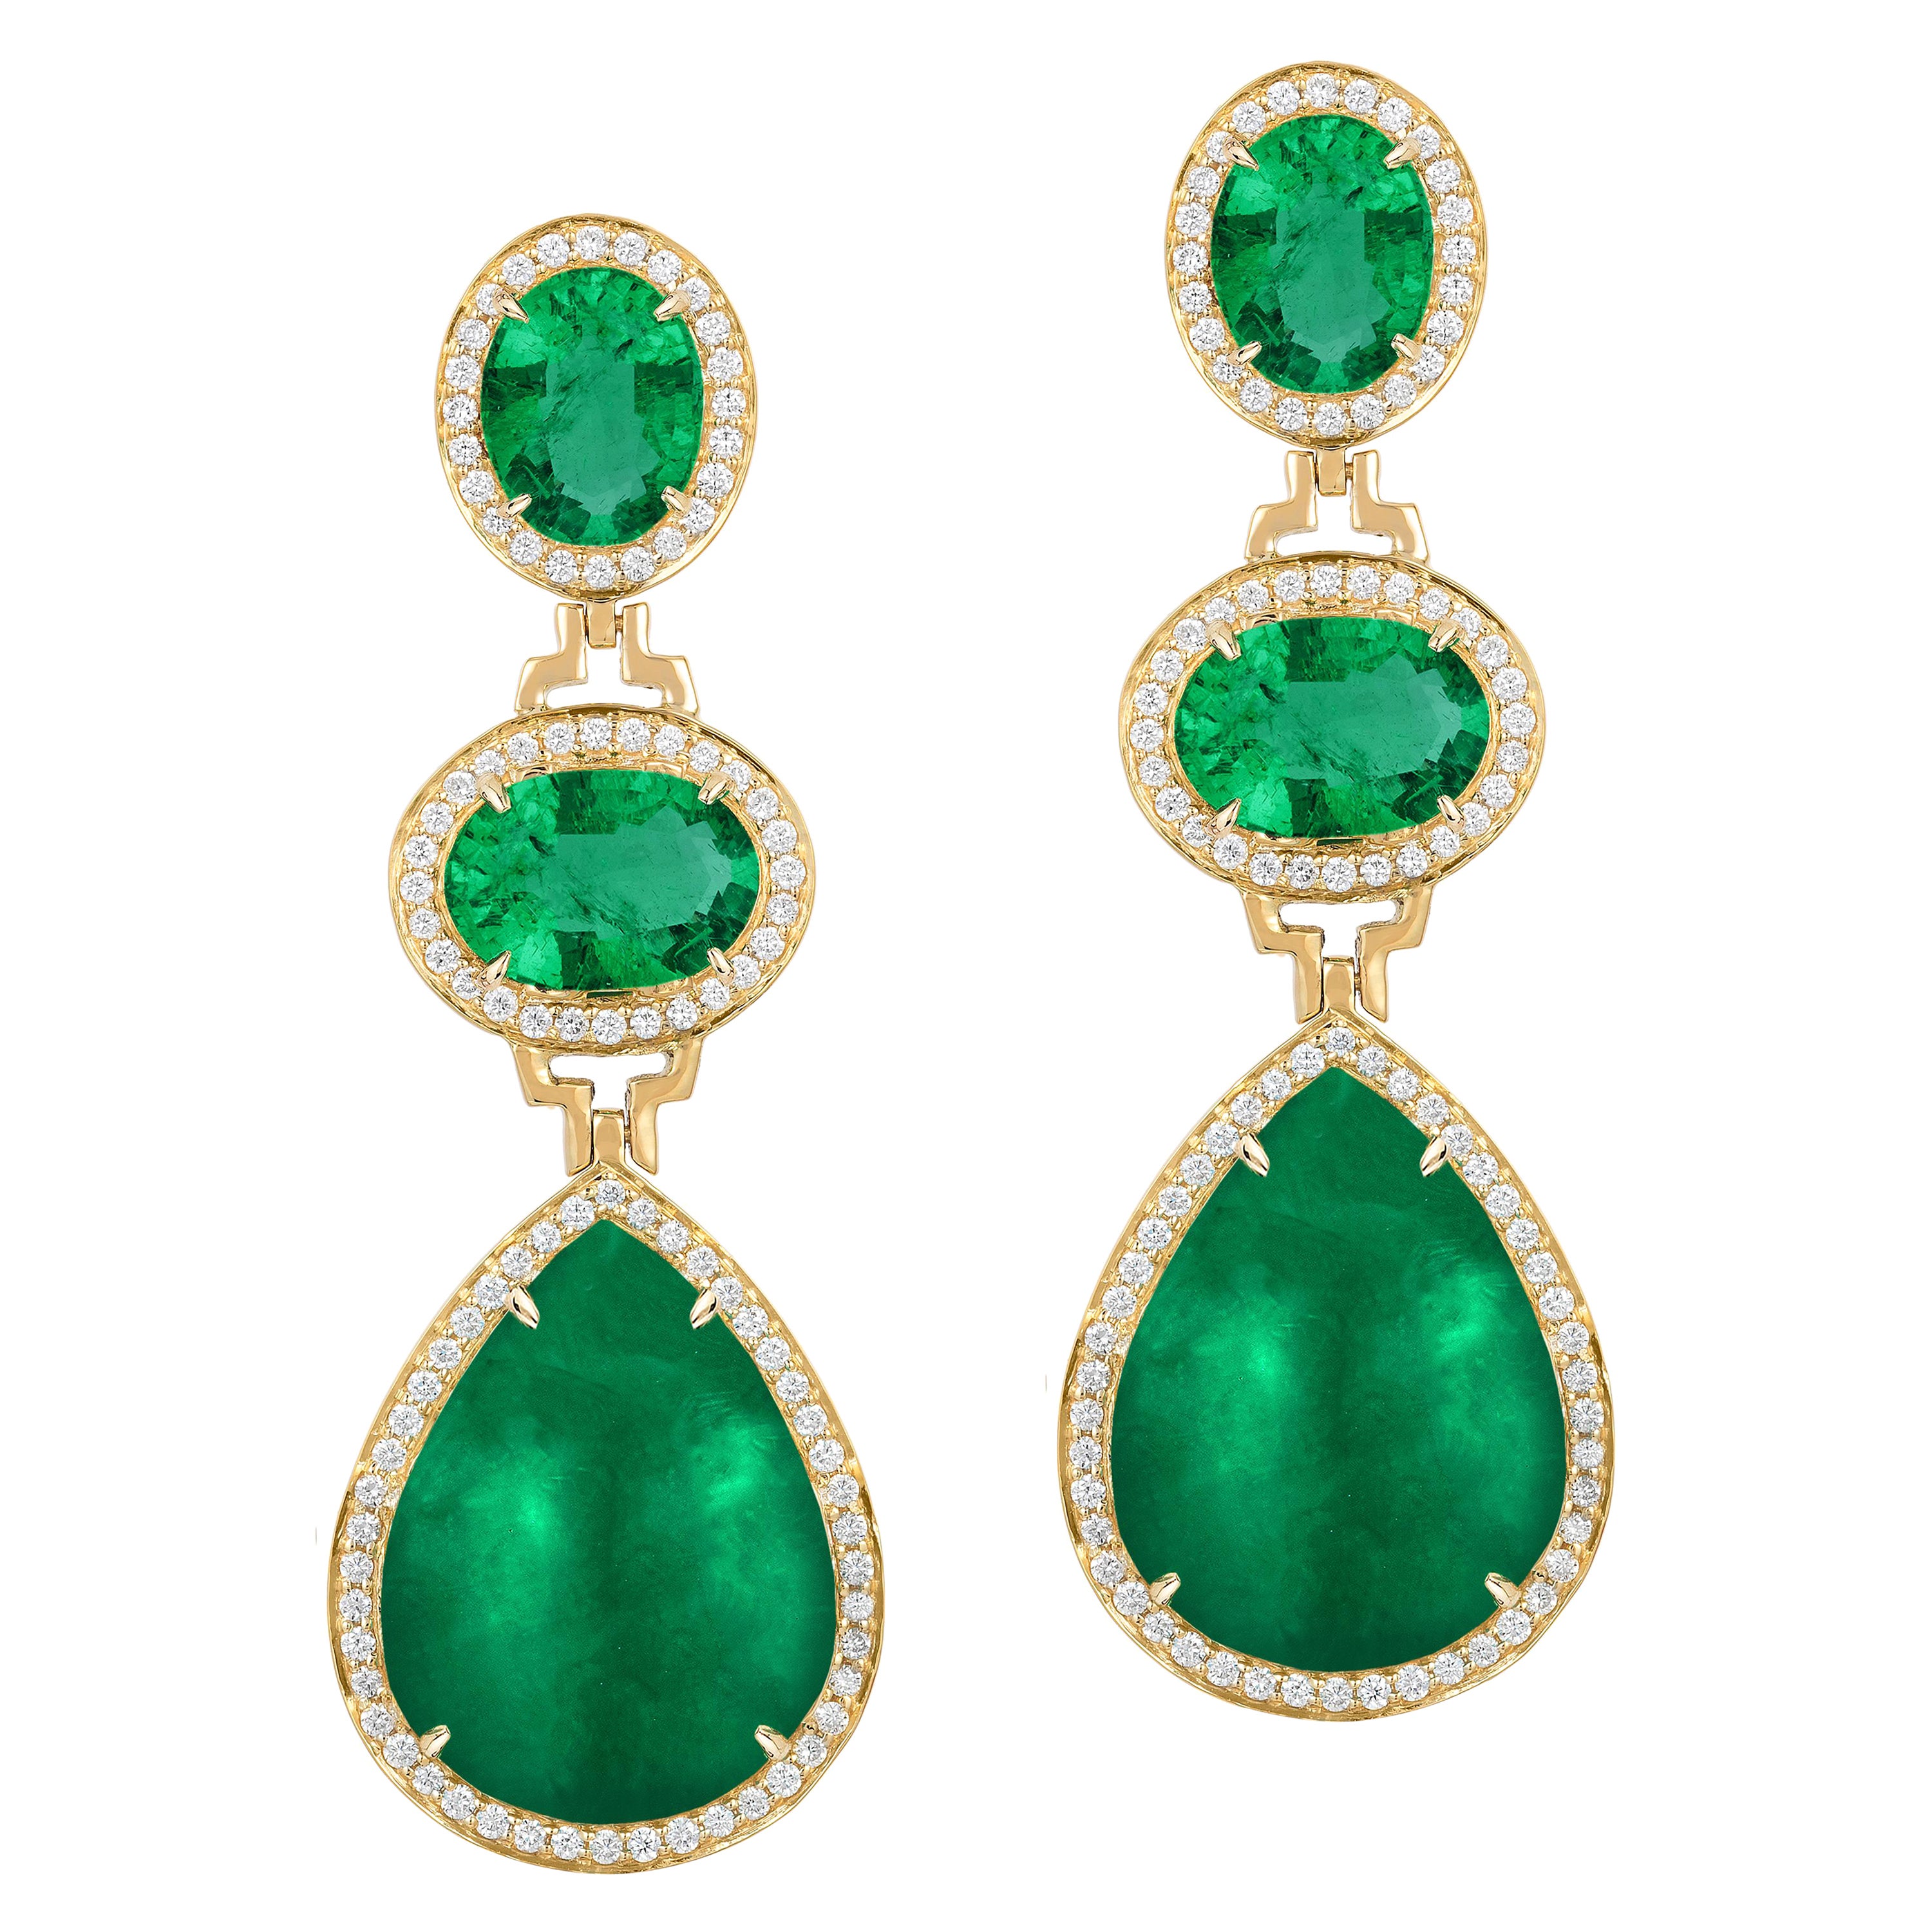 Goshwara 3 Tier Faceted Oval and Pear Shape Emerald Drop Earrings 